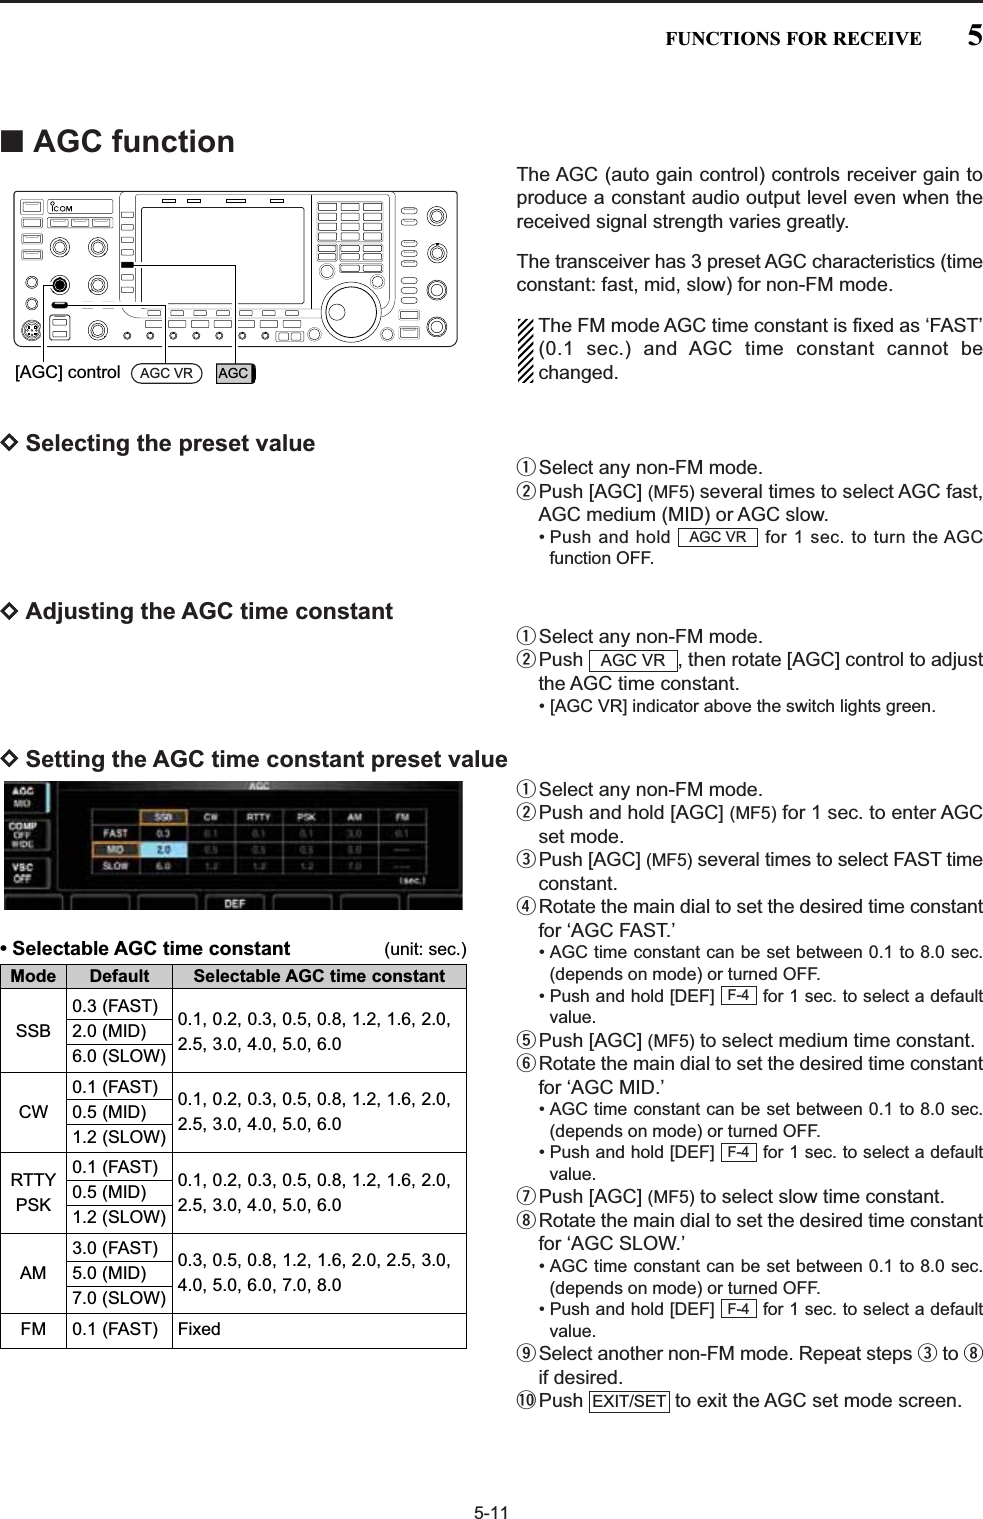 5-11■AGC functionThe AGC (auto gain control) controls receiver gain toproduce a constant audio output level even when thereceived signal strength varies greatly.The transceiver has 3 preset AGC characteristics (timeconstant: fast, mid, slow) for non-FM mode. The FM mode AGC time constant is fixed as ‘FAST’(0.1 sec.) and AGC time constant cannot bechanged.DSelecting the preset valueqSelect any non-FM mode.wPush [AGC] (MF5) several times to select AGC fast,AGC medium (MID) or AGC slow.• Push and hold  for 1 sec. to turn the AGCfunction OFF. DAdjusting the AGC time constant qSelect any non-FM mode.wPush  , then rotate [AGC] control to adjustthe AGC time constant.• [AGC VR] indicator above the switch lights green.DSetting the AGC time constant preset valueqSelect any non-FM mode.wPush and hold [AGC] (MF5) for 1 sec. to enter AGCset mode.ePush [AGC] (MF5) several times to select FAST timeconstant.rRotate the main dial to set the desired time constantfor ‘AGC FAST.’• AGC time constant can be set between 0.1 to 8.0 sec.(depends on mode) or turned OFF.• Push and hold [DEF]  for 1 sec. to select a defaultvalue.tPush [AGC] (MF5) to select medium time constant.yRotate the main dial to set the desired time constantfor ‘AGC MID.’• AGC time constant can be set between 0.1 to 8.0 sec.(depends on mode) or turned OFF.• Push and hold [DEF]  for 1 sec. to select a defaultvalue.uPush [AGC] (MF5) to select slow time constant.iRotate the main dial to set the desired time constantfor ‘AGC SLOW.’• AGC time constant can be set between 0.1 to 8.0 sec.(depends on mode) or turned OFF.• Push and hold [DEF]  for 1 sec. to select a defaultvalue.oSelect another non-FM mode. Repeat steps eto iif desired.!0 Push  to exit the AGC set mode screen.EXIT/SETF-4F-4F-4AGC VRAGC VR[AGC] control AGC VR AGC5FUNCTIONS FOR RECEIVEMode Default Selectable AGC time constant0.3 (FAST) 0.1, 0.2, 0.3, 0.5, 0.8, 1.2, 1.6, 2.0, SSB 2.0 (MID) 2.5, 3.0, 4.0, 5.0, 6.06.0 (SLOW)0.1 (FAST) 0.1, 0.2, 0.3, 0.5, 0.8, 1.2, 1.6, 2.0, CW 0.5 (MID) 2.5, 3.0, 4.0, 5.0, 6.01.2 (SLOW)RTTY 0.1 (FAST) 0.1, 0.2, 0.3, 0.5, 0.8, 1.2, 1.6, 2.0, PSK 0.5 (MID) 2.5, 3.0, 4.0, 5.0, 6.01.2 (SLOW)3.0 (FAST) 0.3, 0.5, 0.8, 1.2, 1.6, 2.0, 2.5, 3.0, AM 5.0 (MID) 4.0, 5.0, 6.0, 7.0, 8.07.0 (SLOW)FM 0.1 (FAST) Fixed• Selectable AGC time constant (unit: sec.)